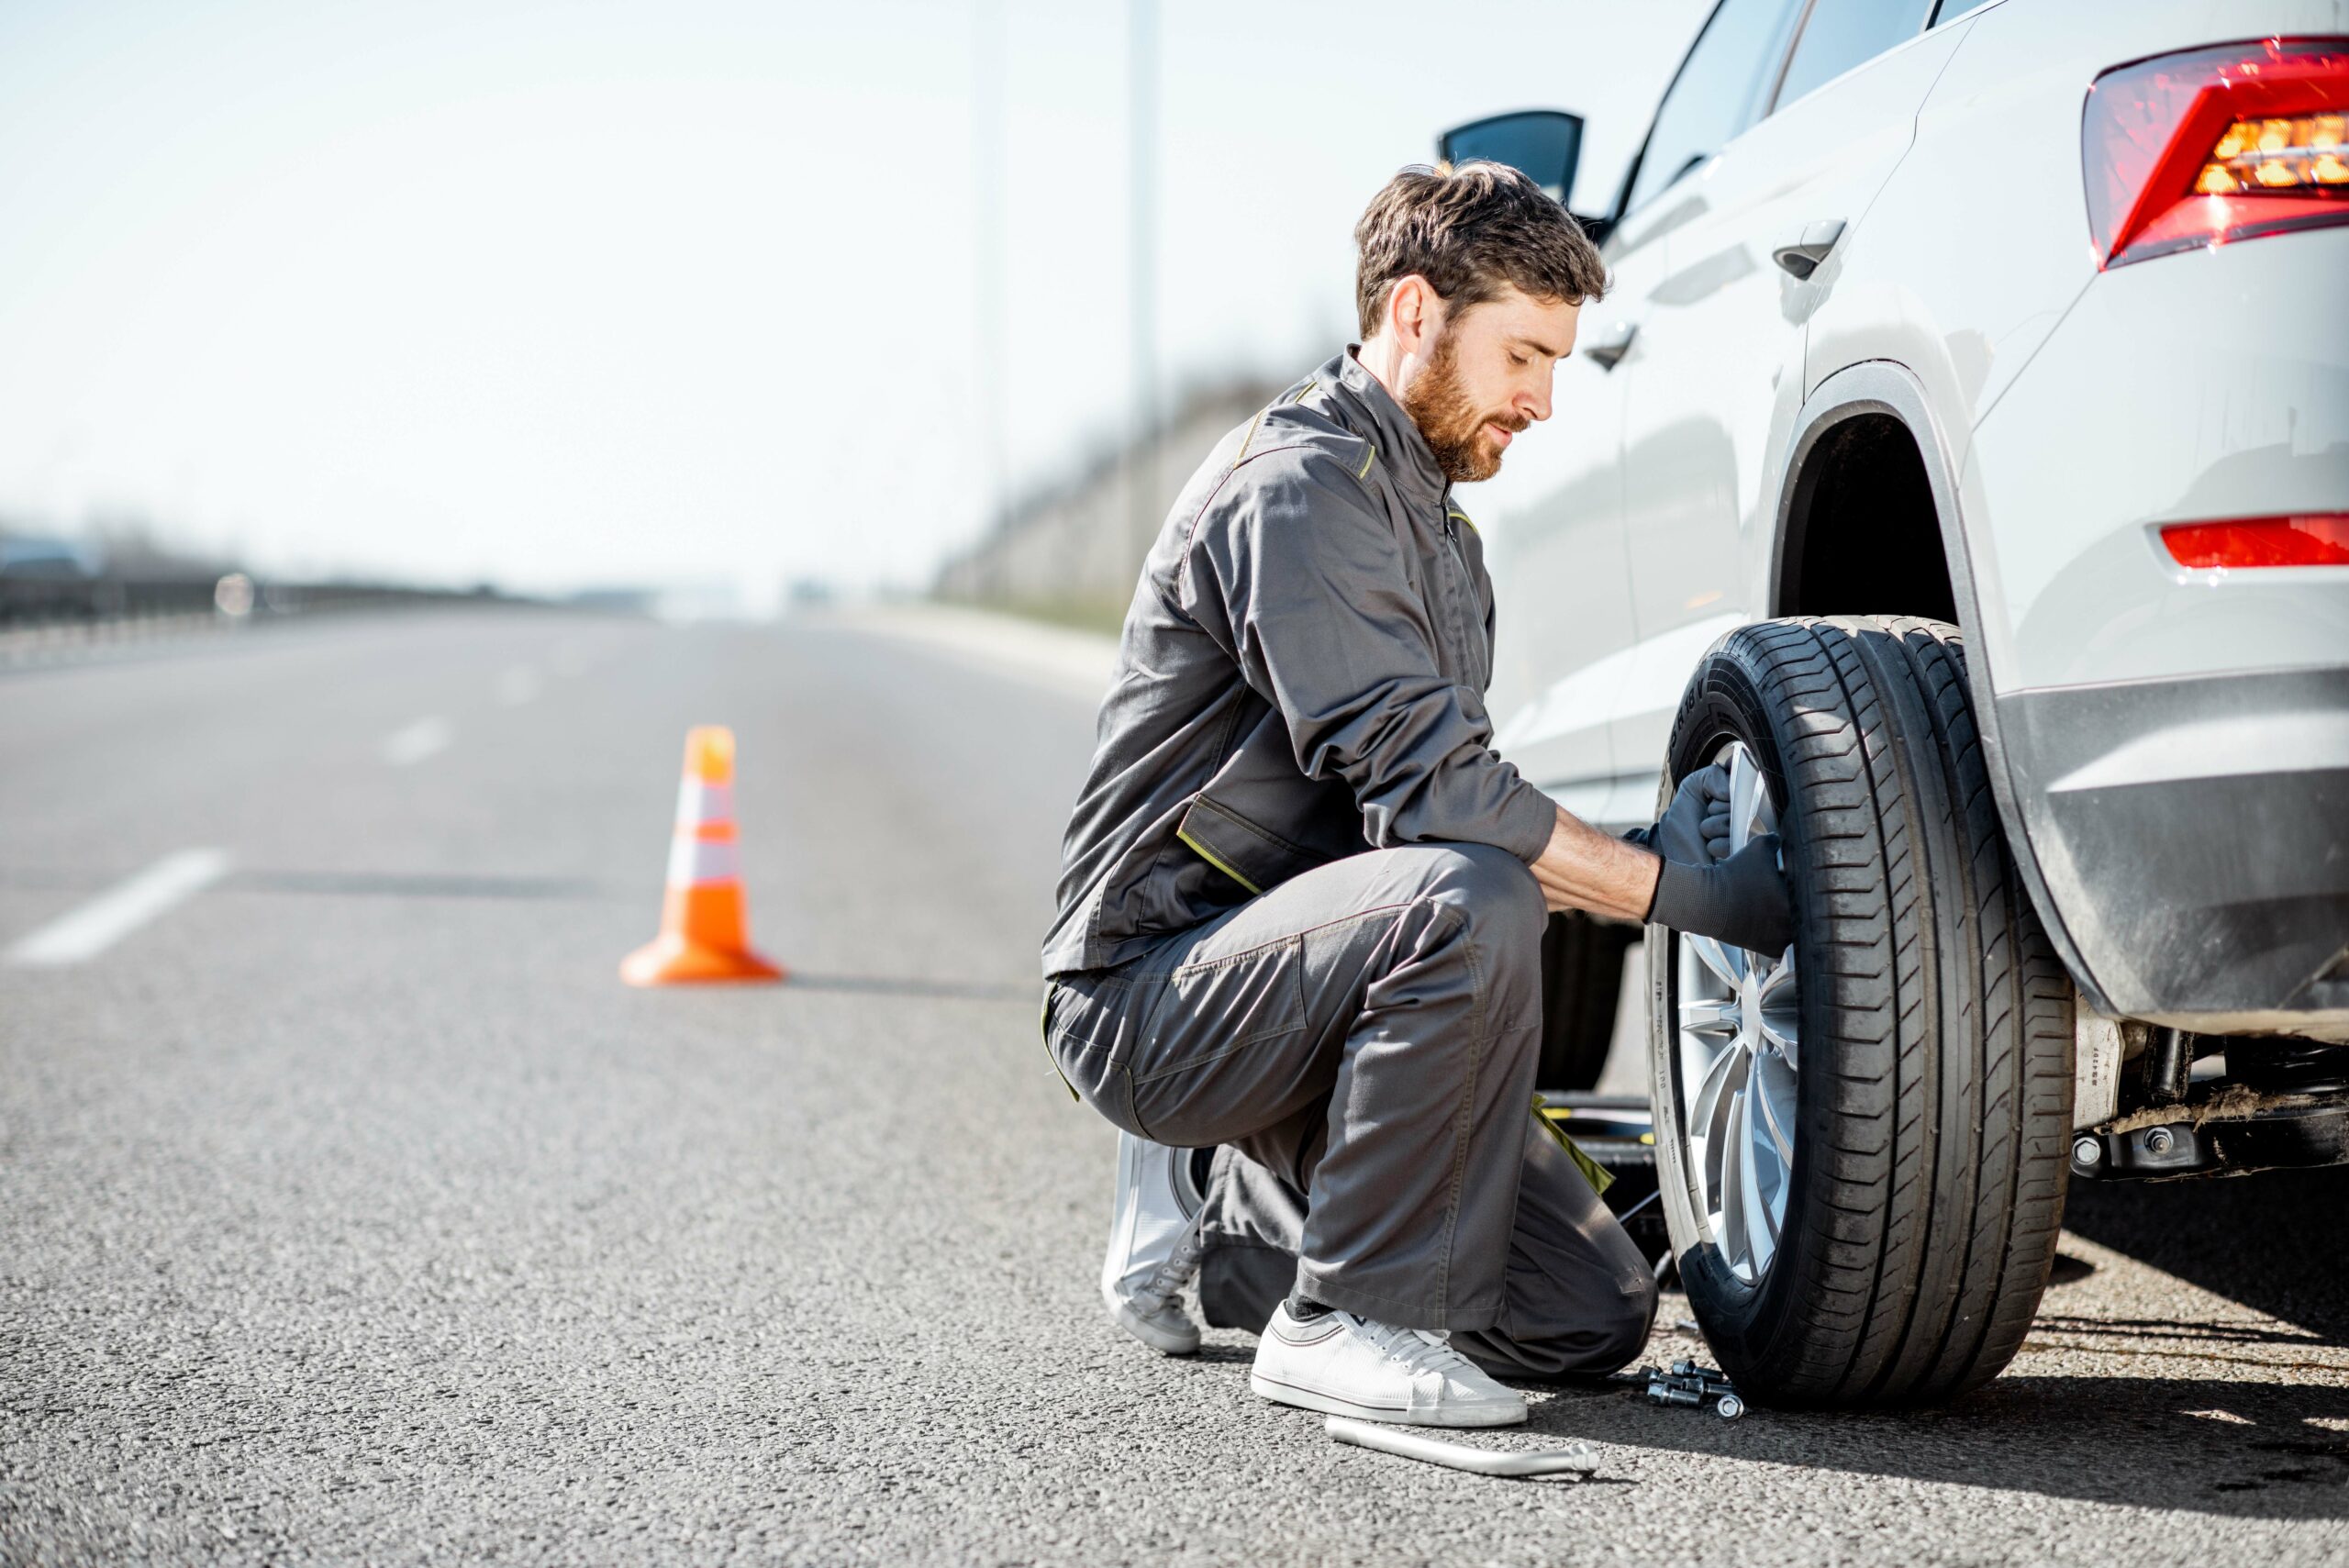 Handsome road assistance worker in uniform changing car wheel on the highway